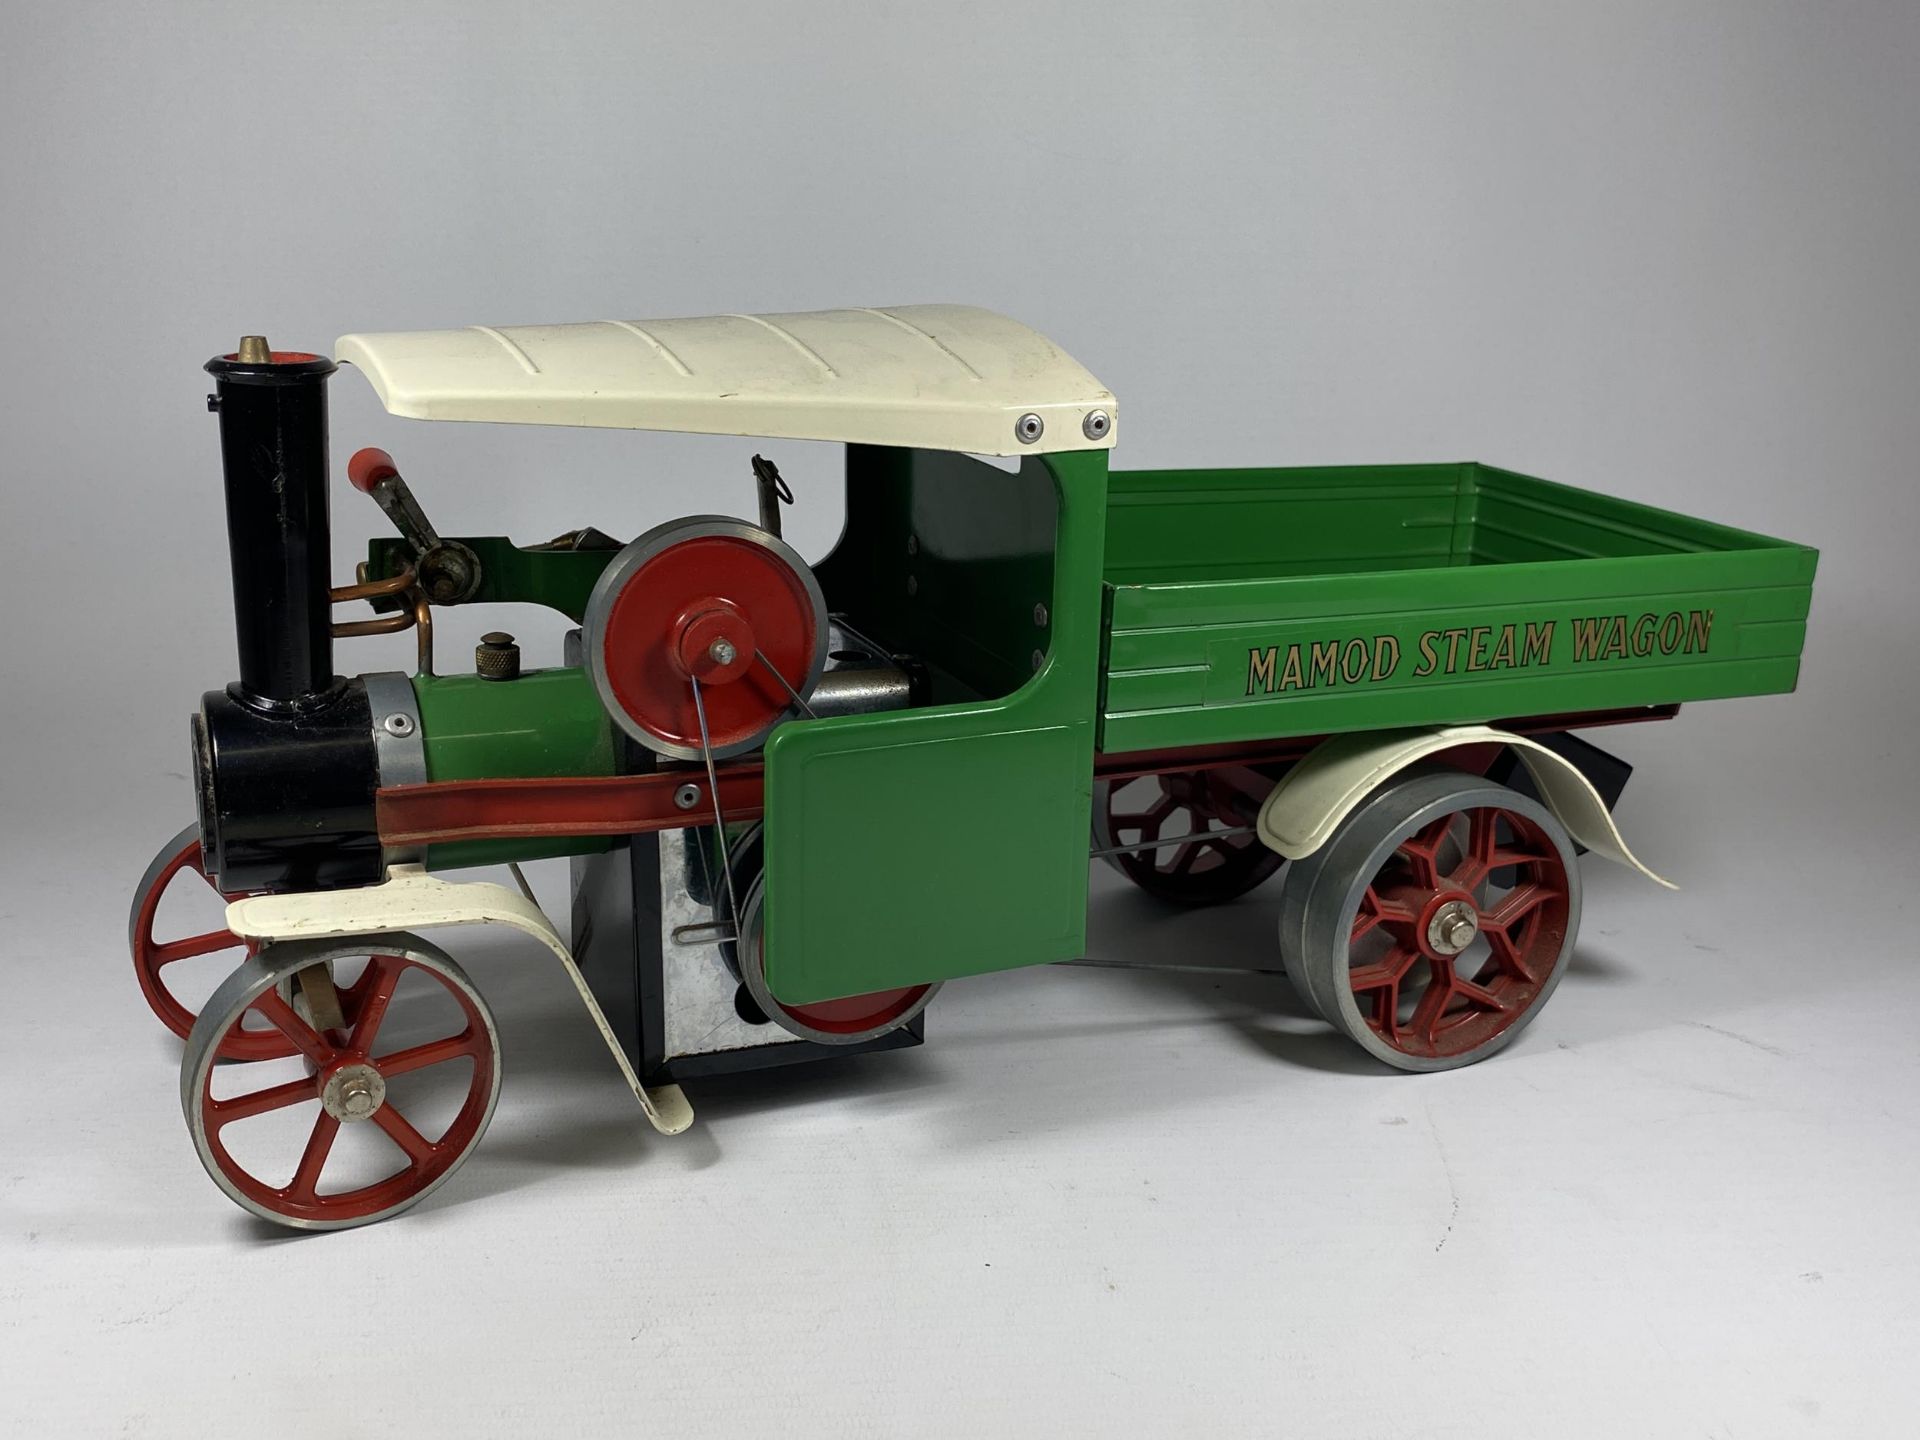 A VINTAGE BOXED MAMOD S1 LIVE STEAM WAGON